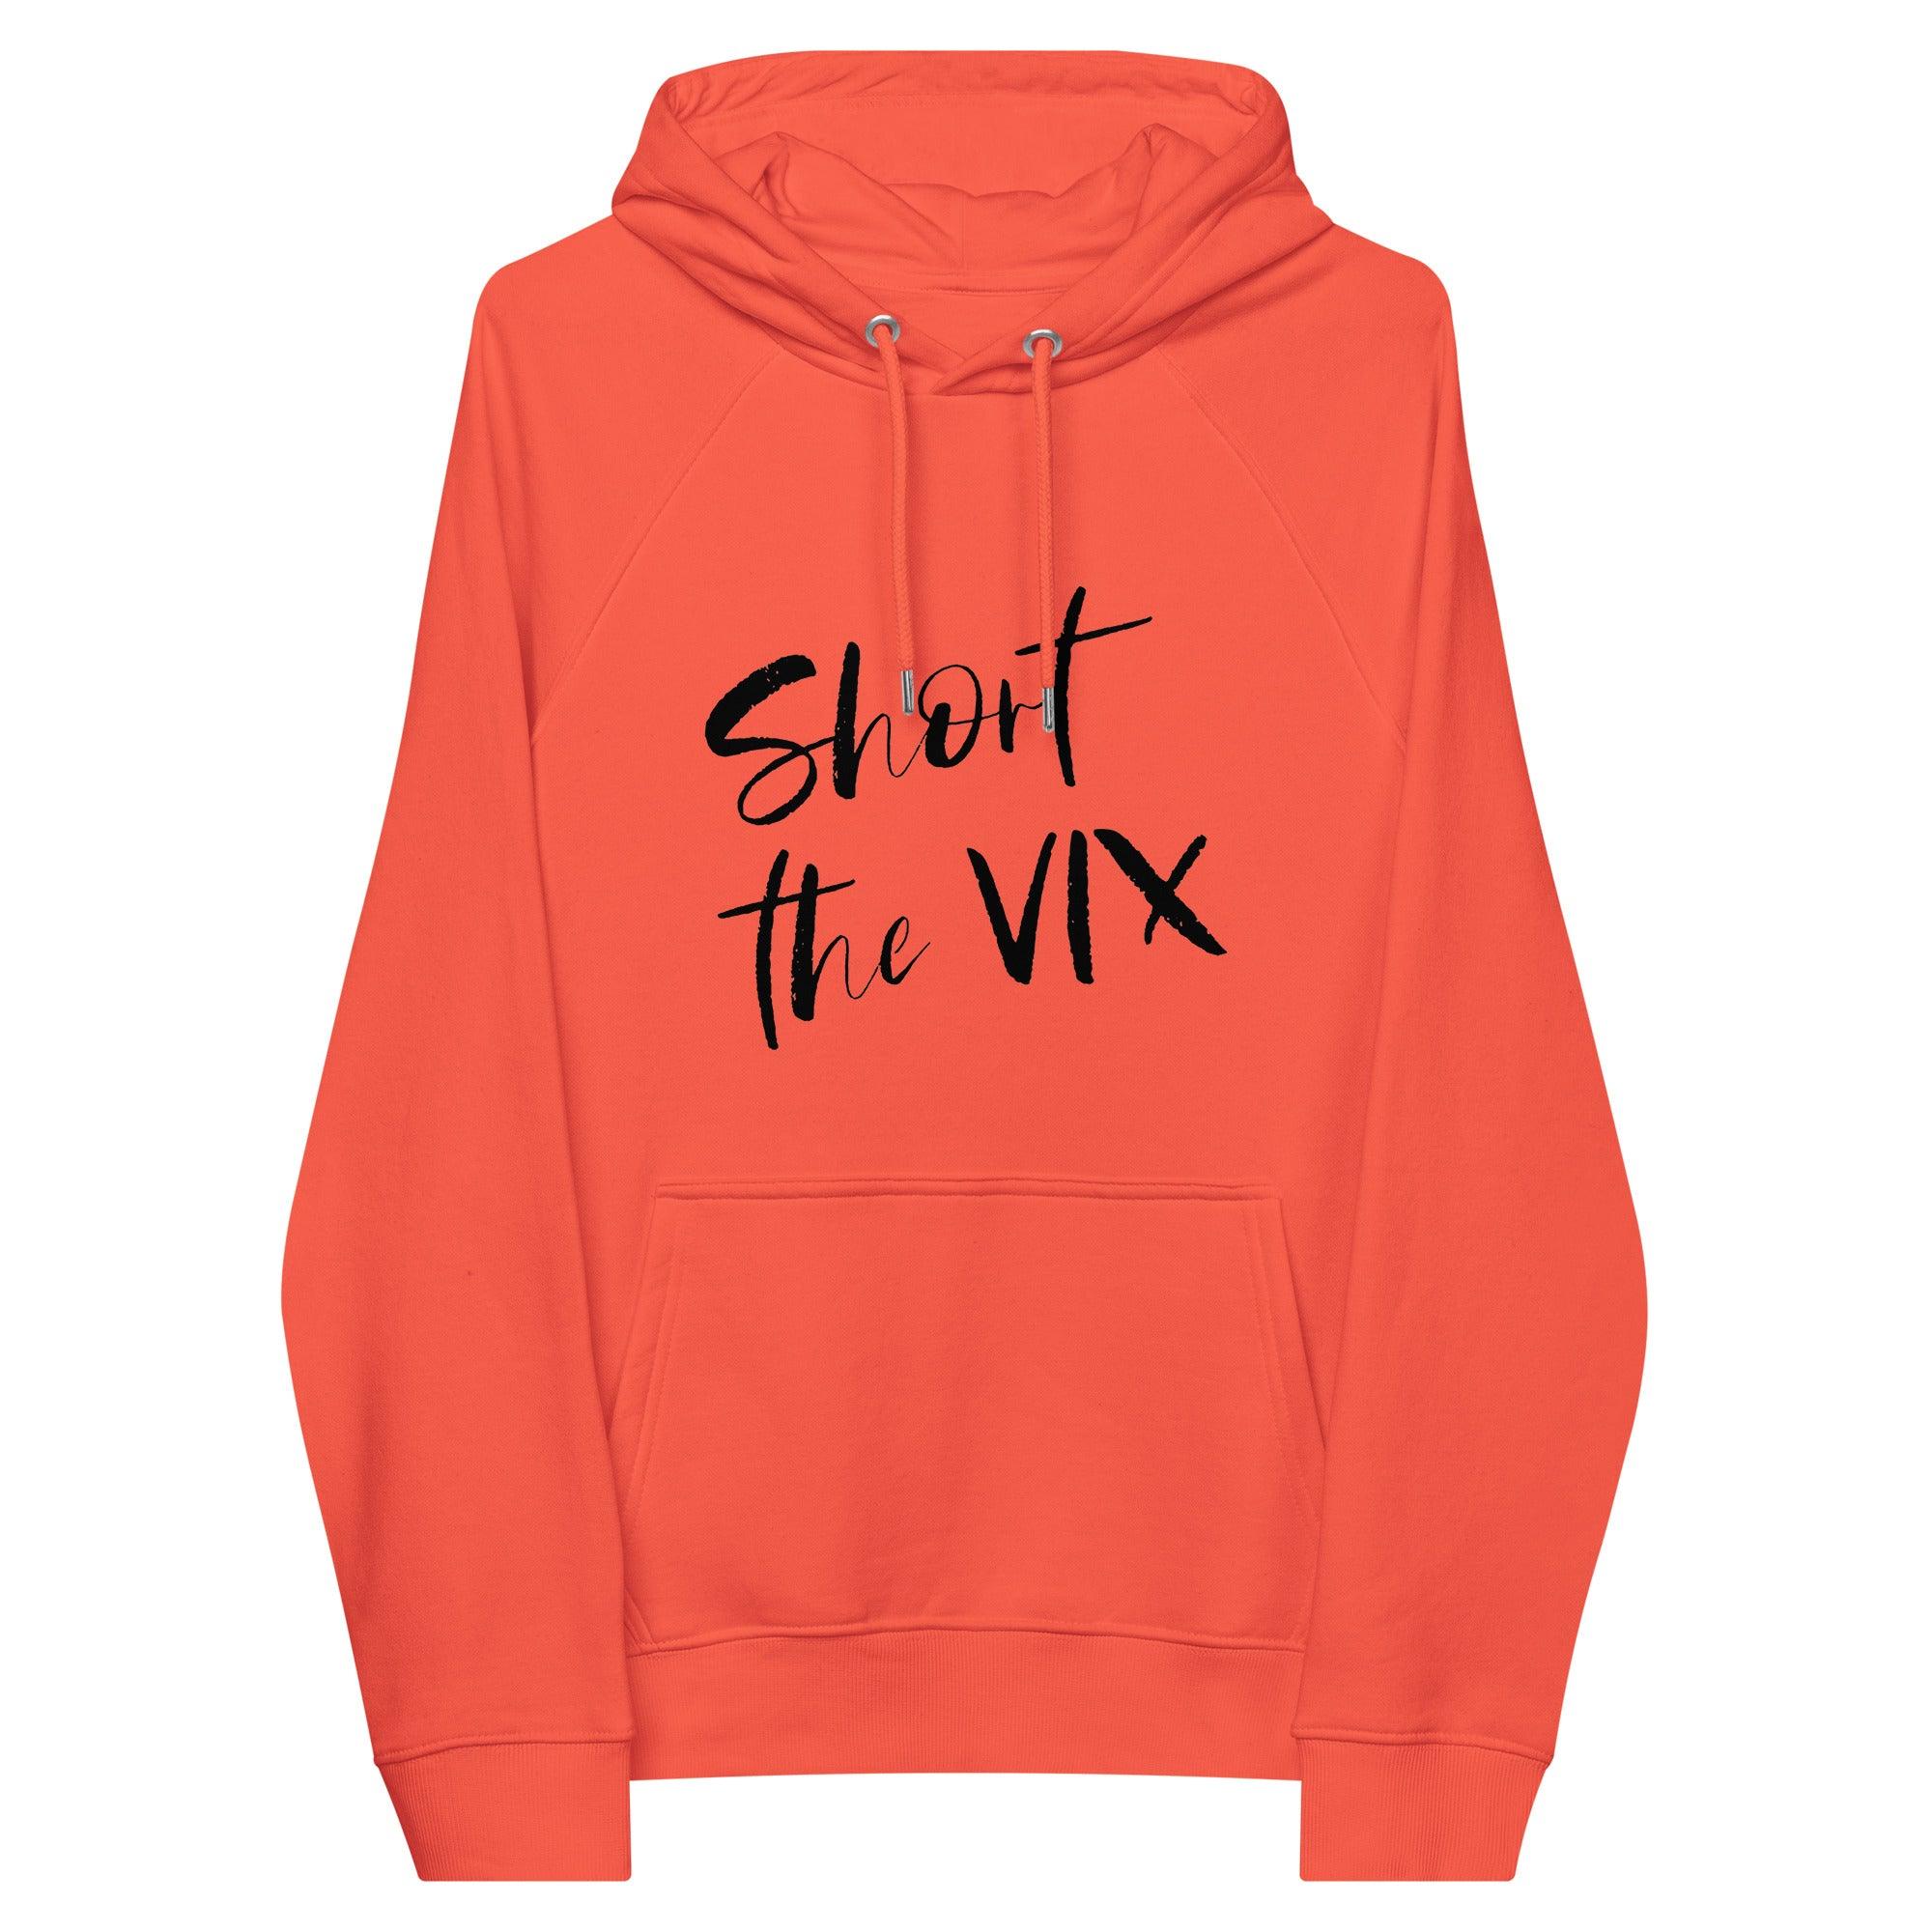 Short The VIX Pullover Hoodie - InvestmenTees